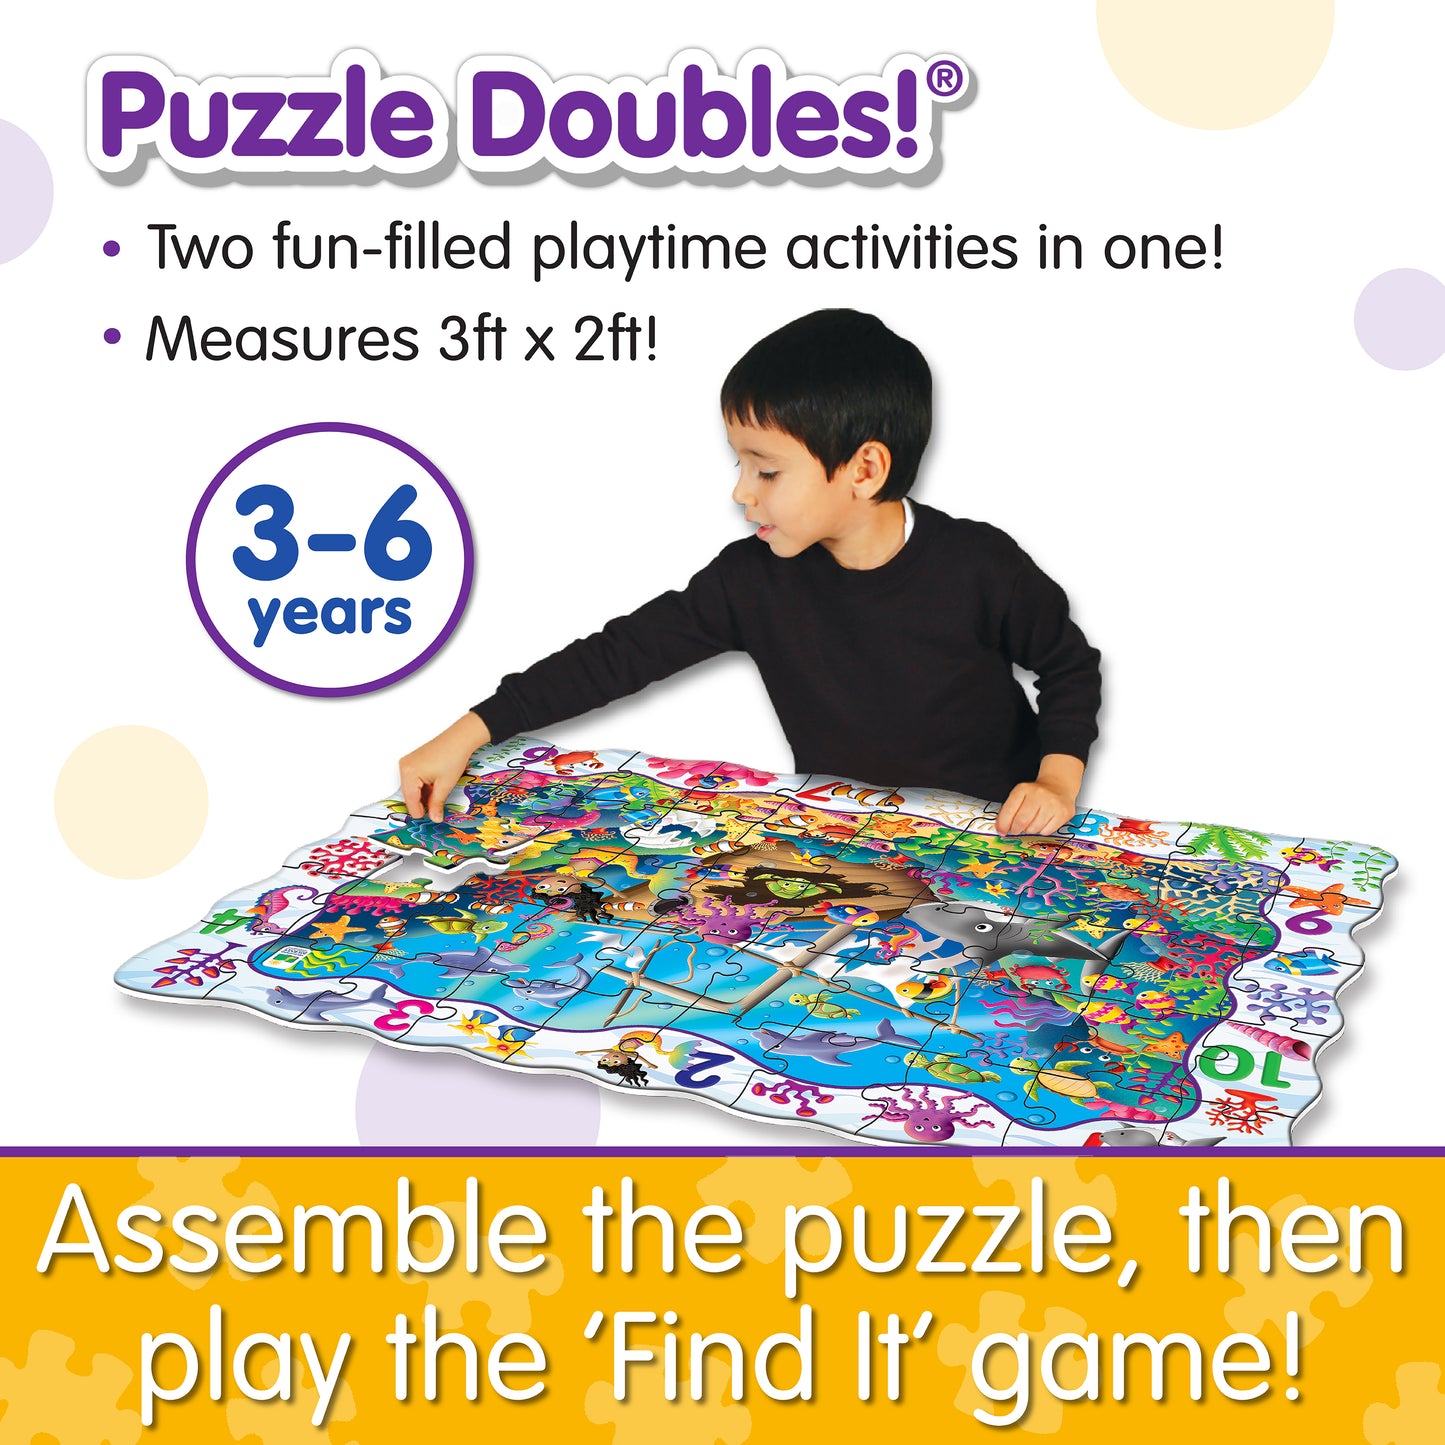 Infographic about Find It - 123 that says, "Assemble the puzzle, then play the 'Find It' game!"